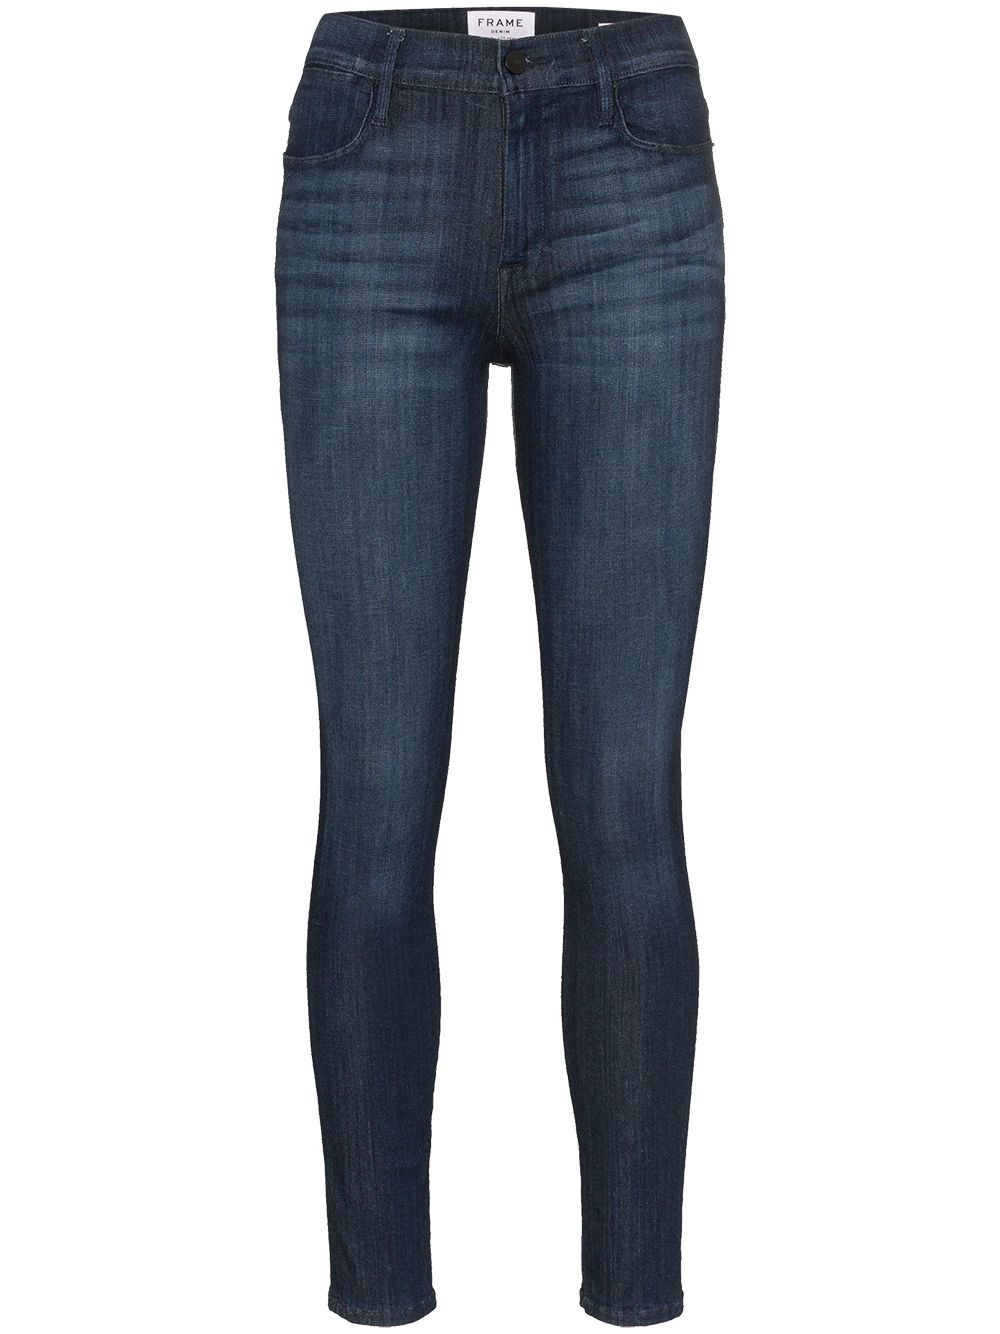 Shop FRAME Le High skinny jeans with Express Delivery - FARFETCH